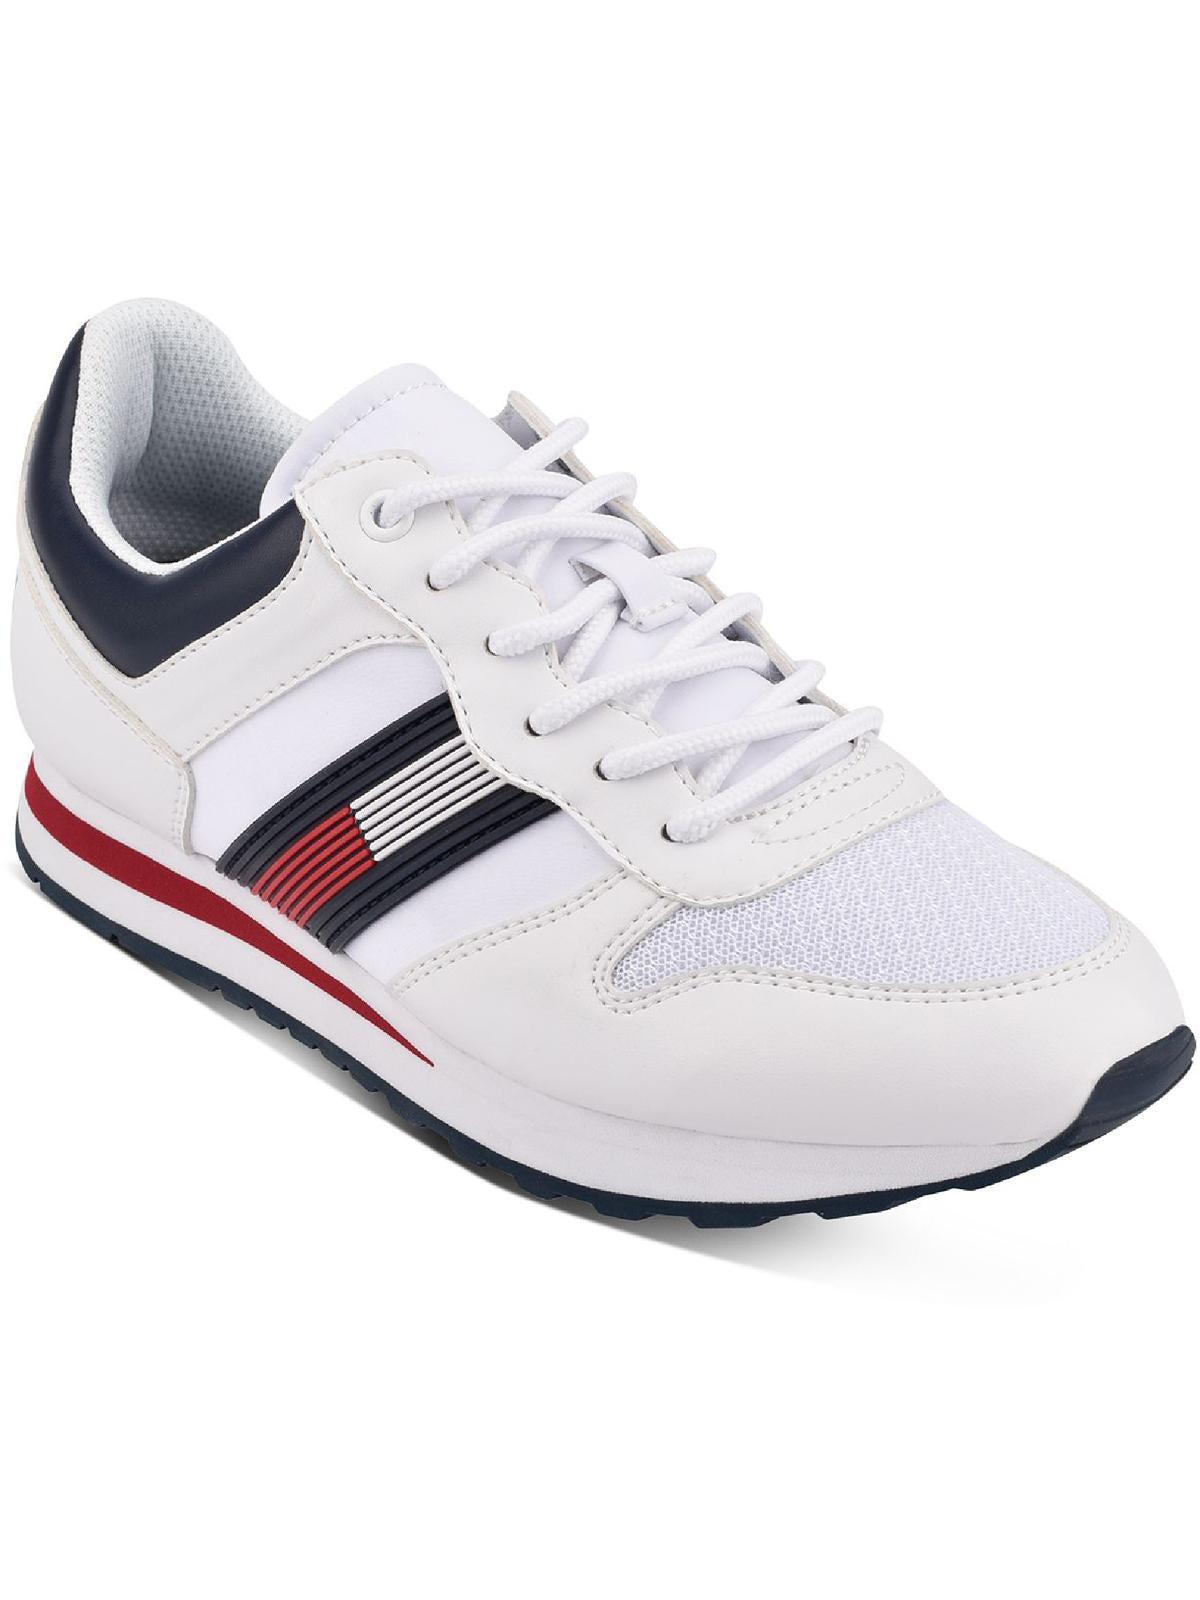 Tommy Hilfiger Liams Fitness Lifestyle Sneakers in White | Lyst